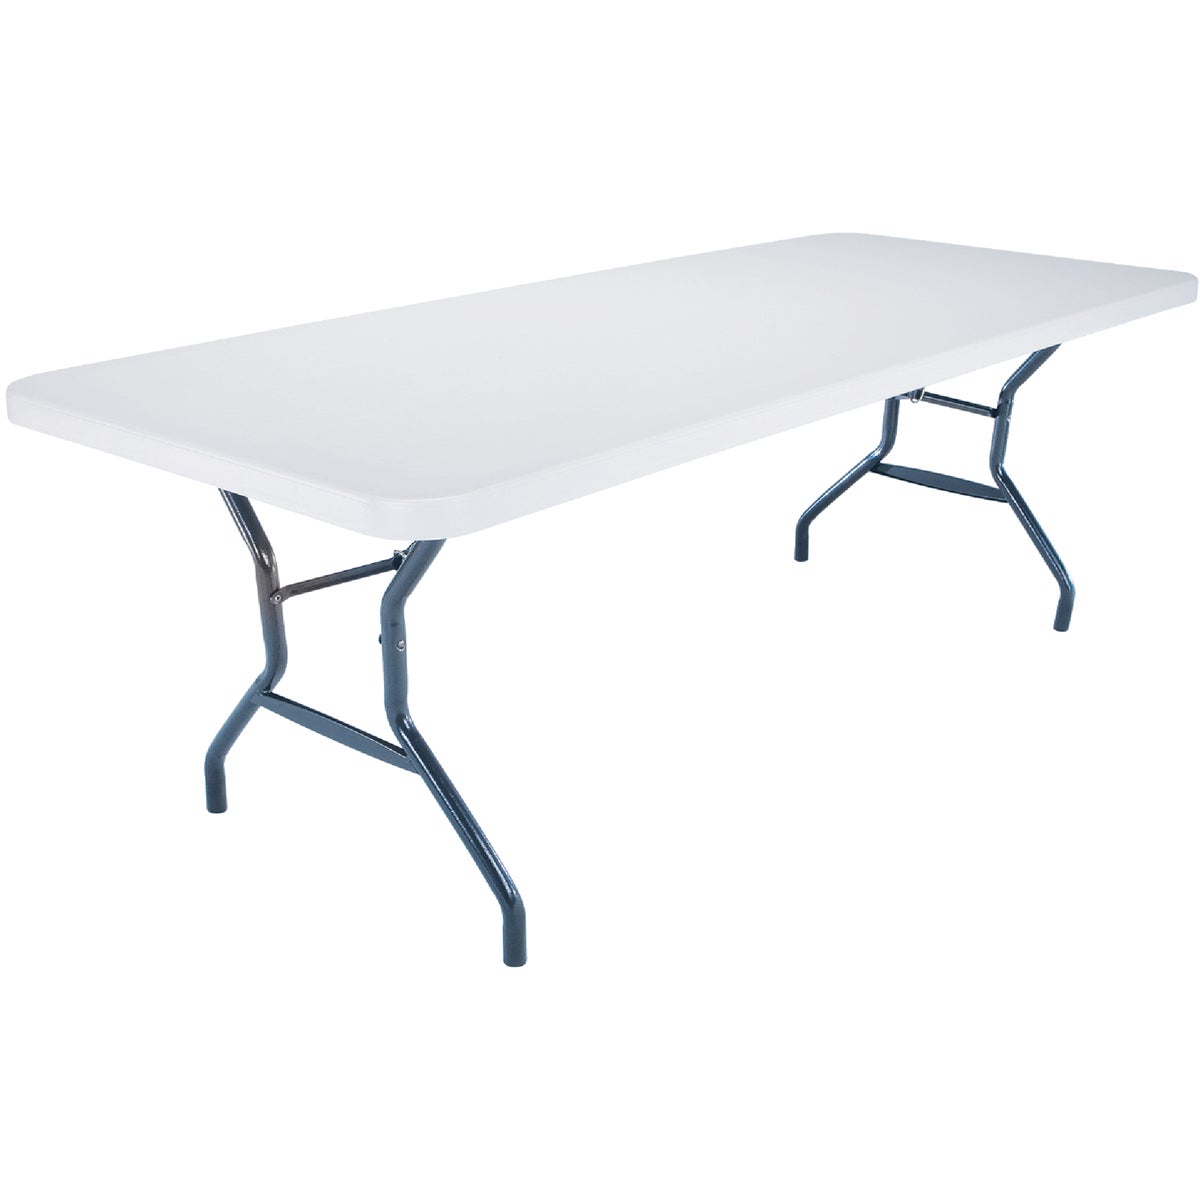 Item 802018, Lifetime folding tables are constructed of UV (ultra violet) resistant, 